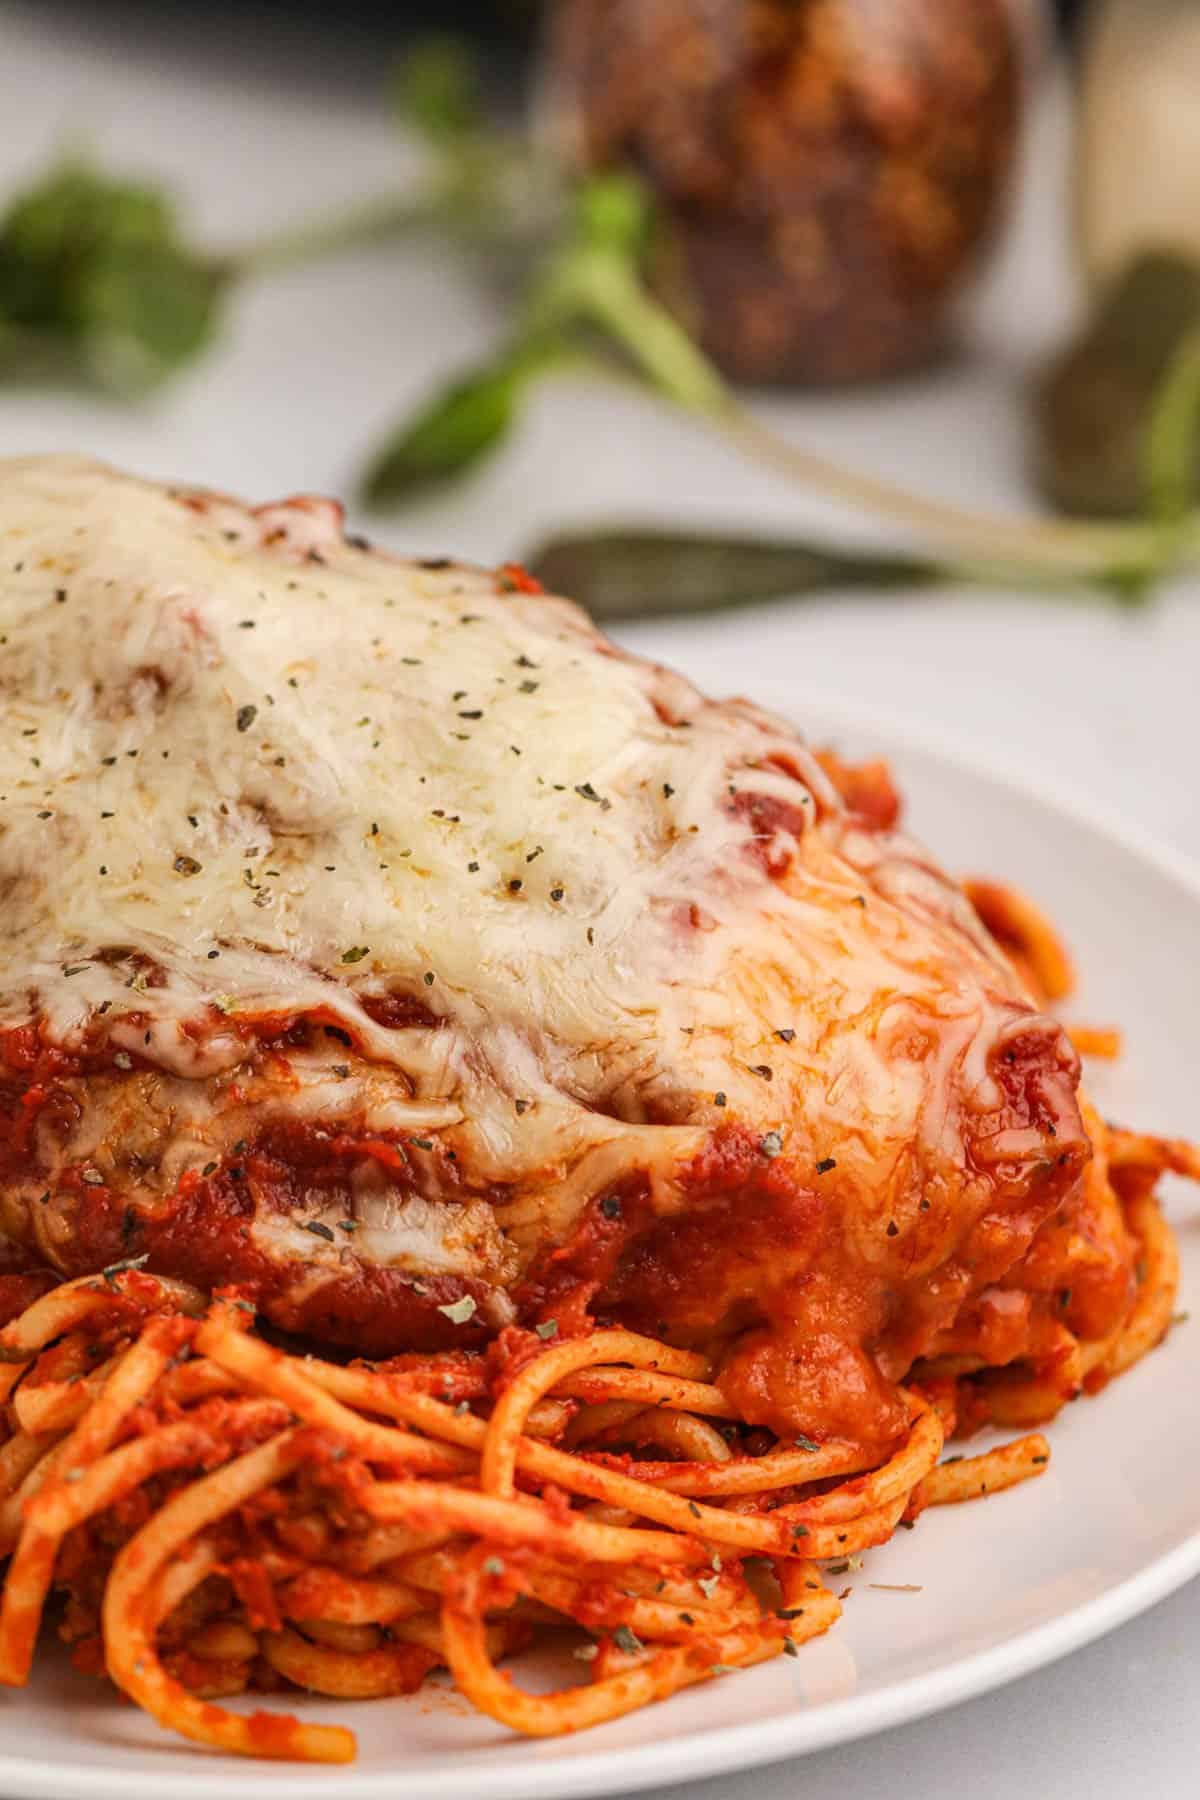 A plate of chicken parmesan over spaghetti.